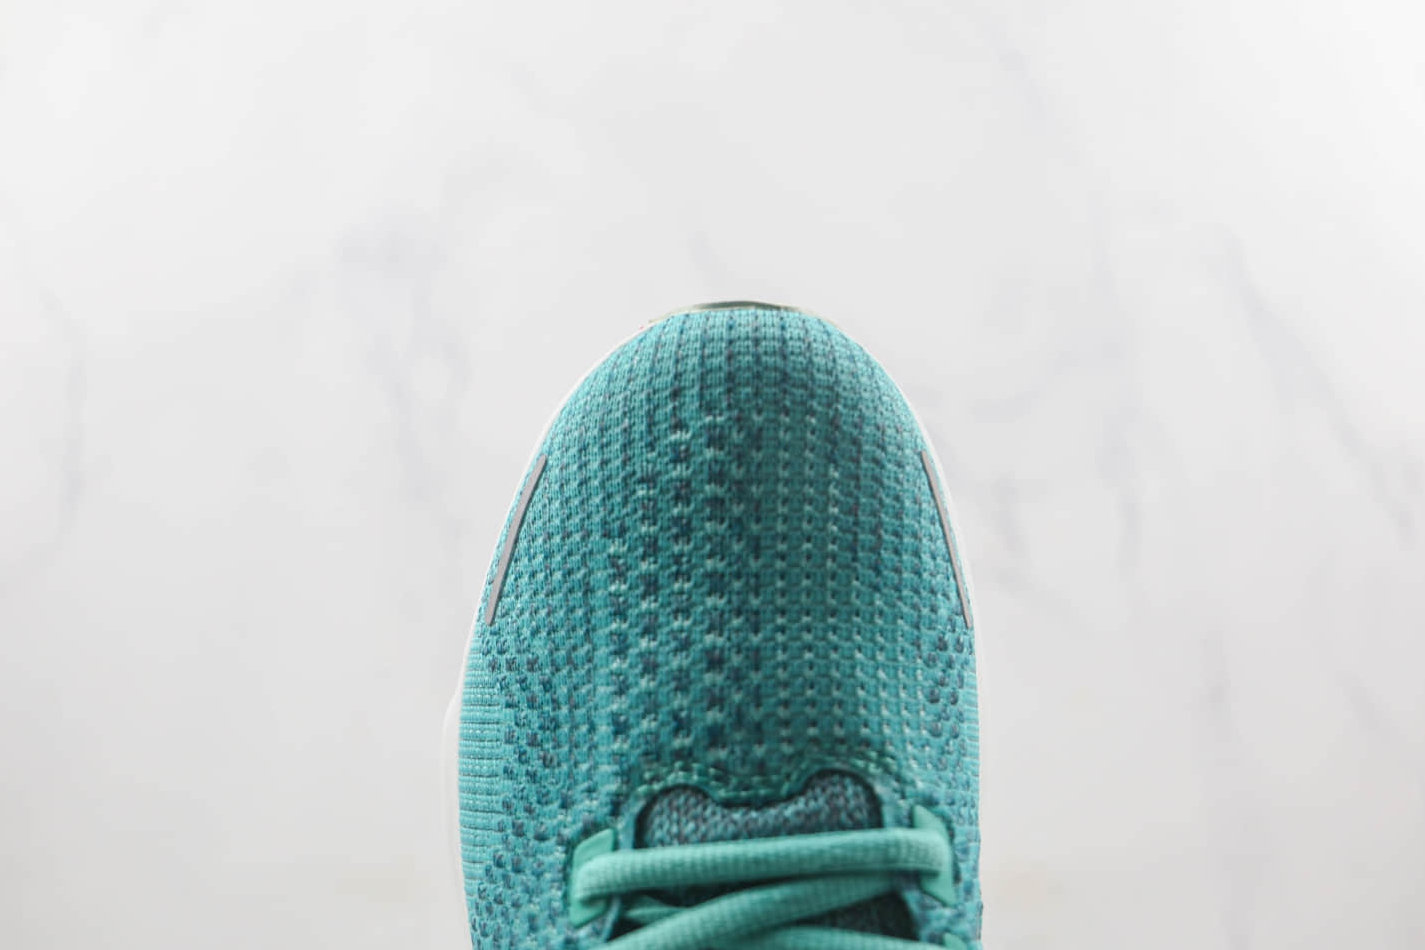 Nike ZoomX Invincible Run Flyknit 2 'Washed Teal' DC9993-300 - Energize Your Run with Stylish Comfort